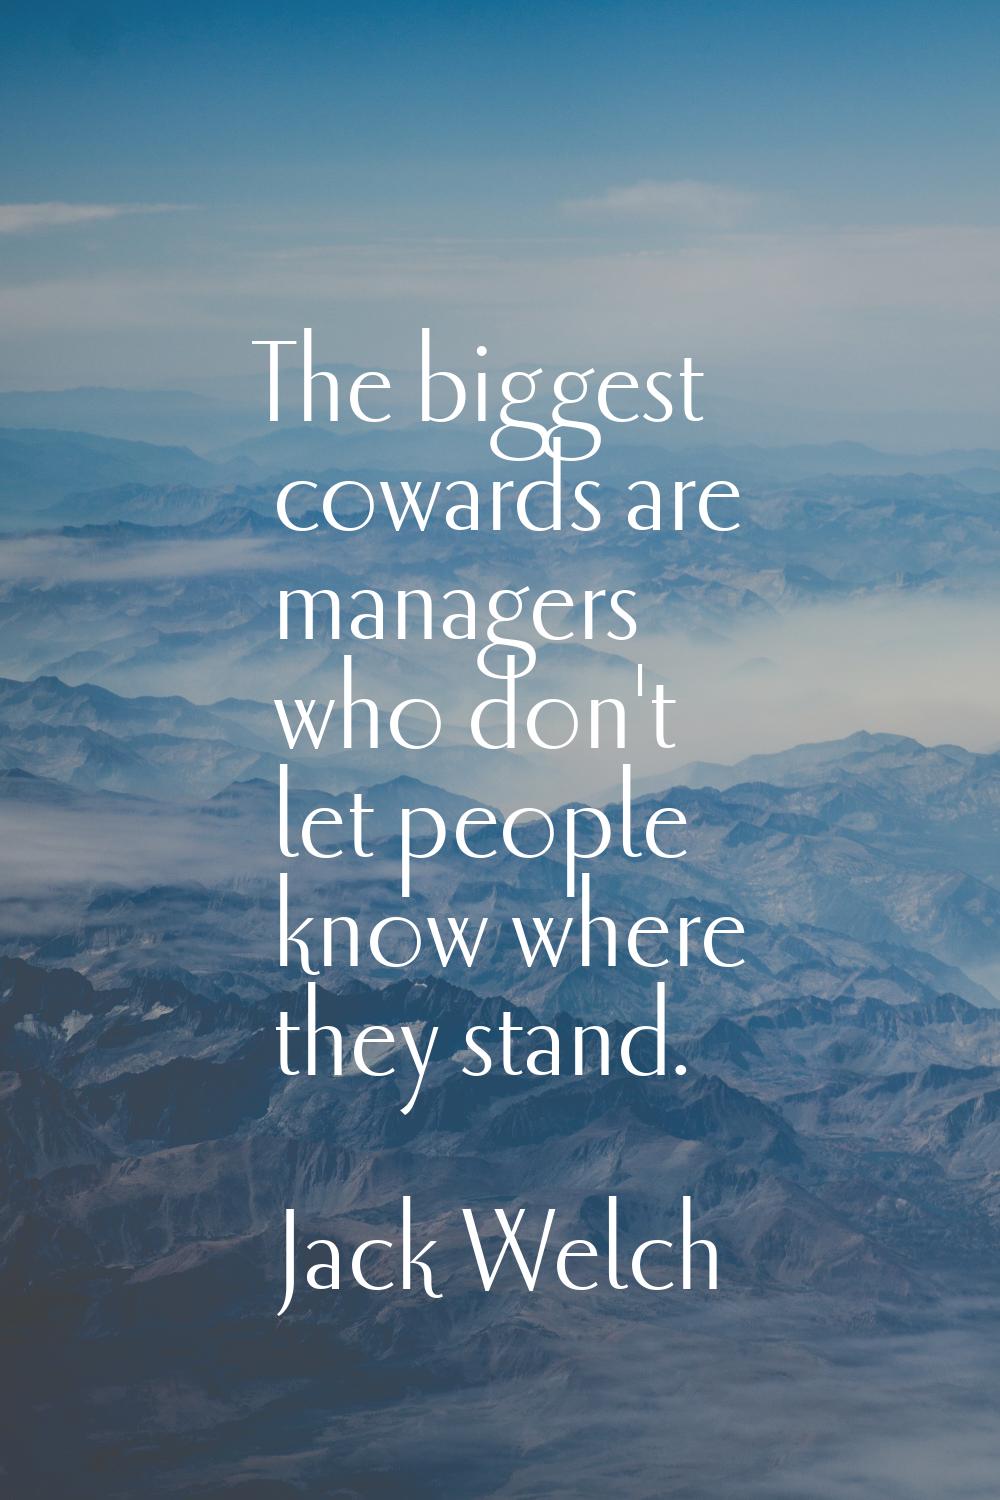 The biggest cowards are managers who don't let people know where they stand.